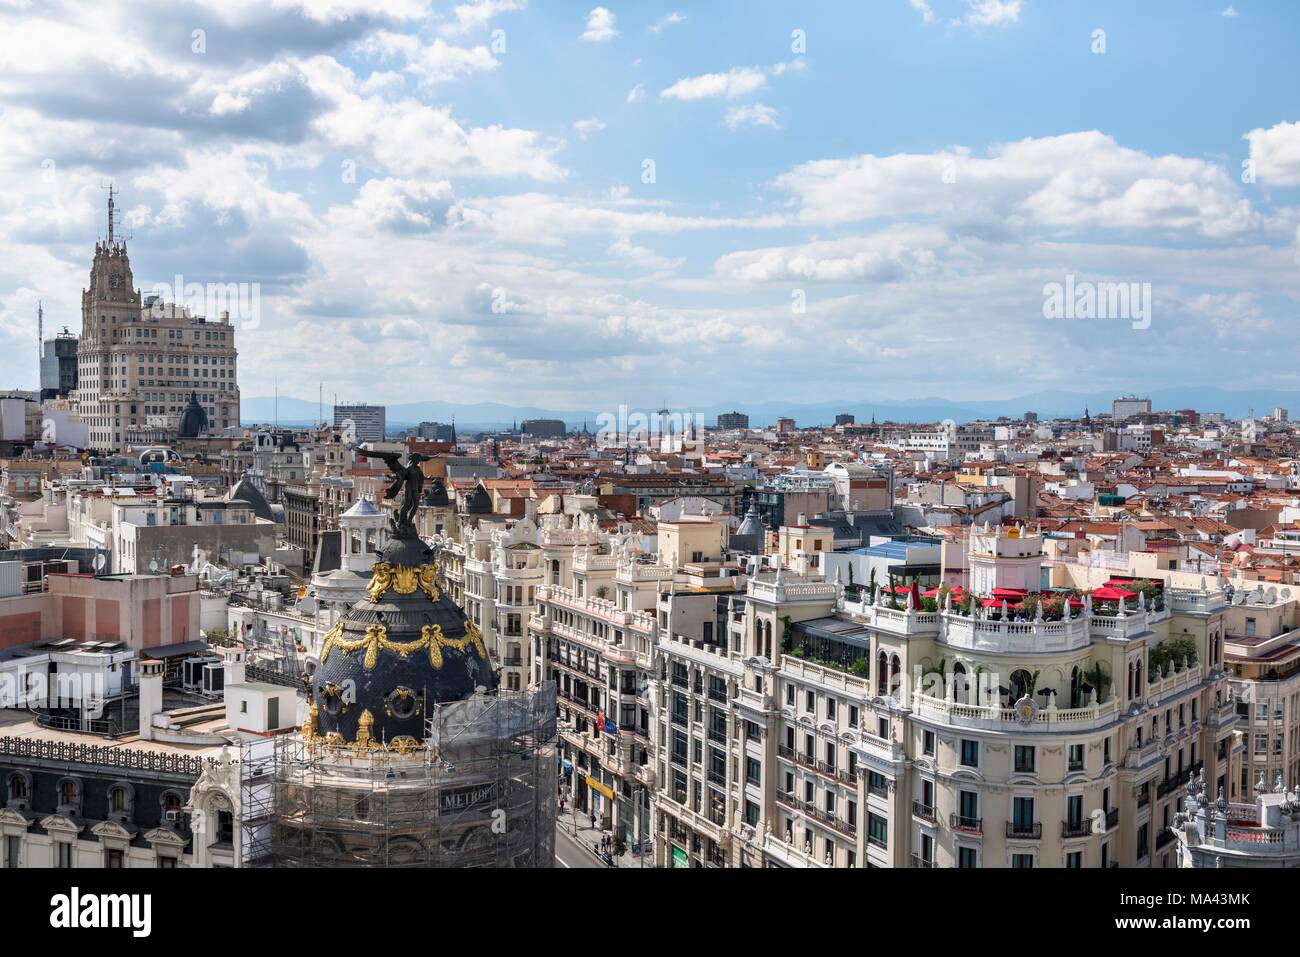 View from the rooftop terrace of the Circulo de Bellas Artes in Madrid, Spain Stock Photo